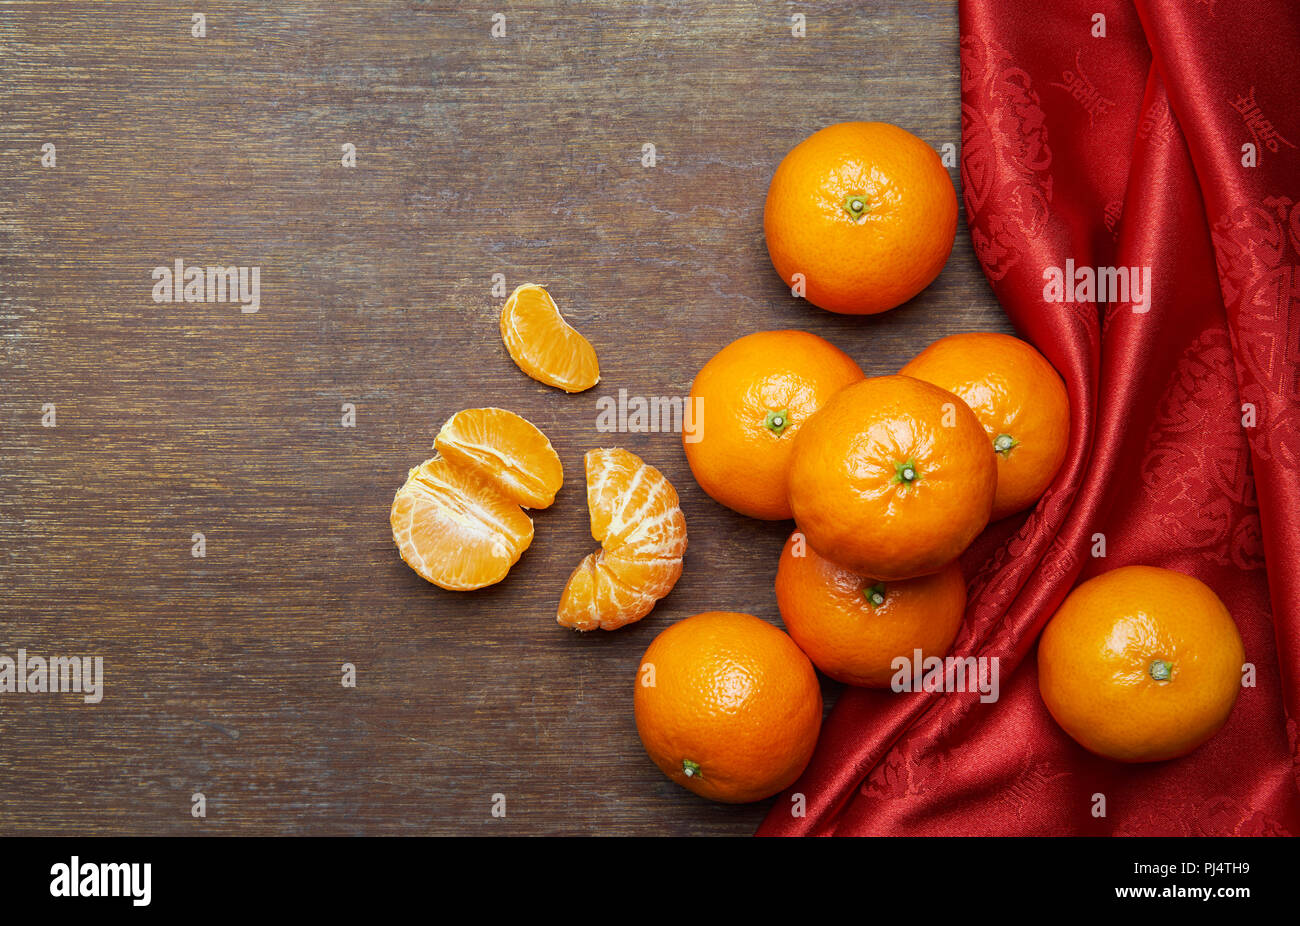 Chinese New Year - Mandarin oranges and red cloth on wooden table Stock Photo